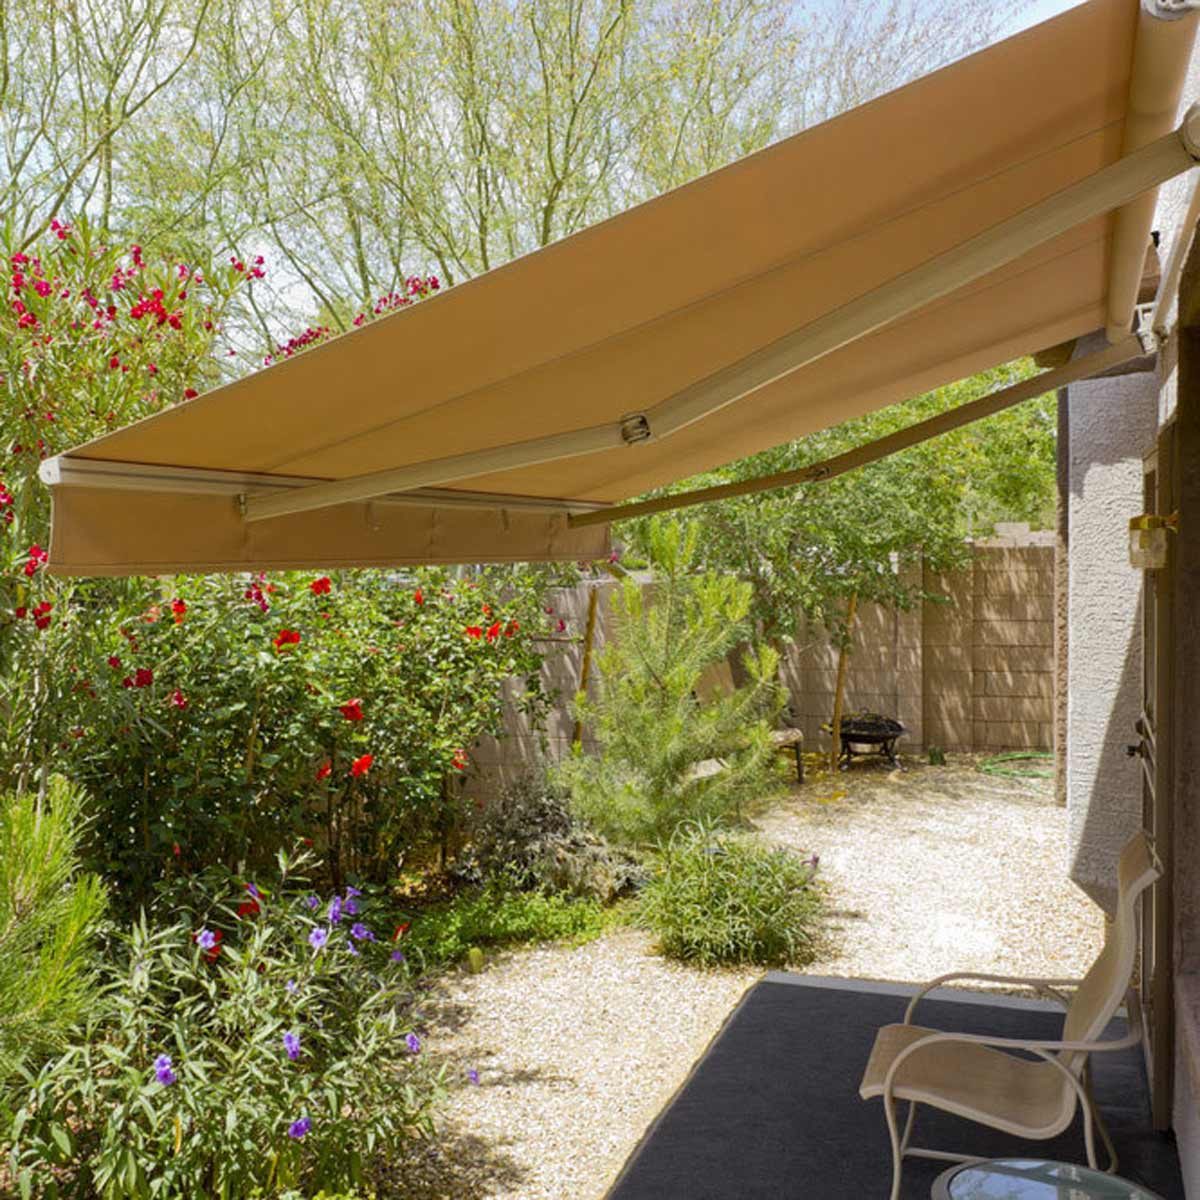 Get a Retractable Awning